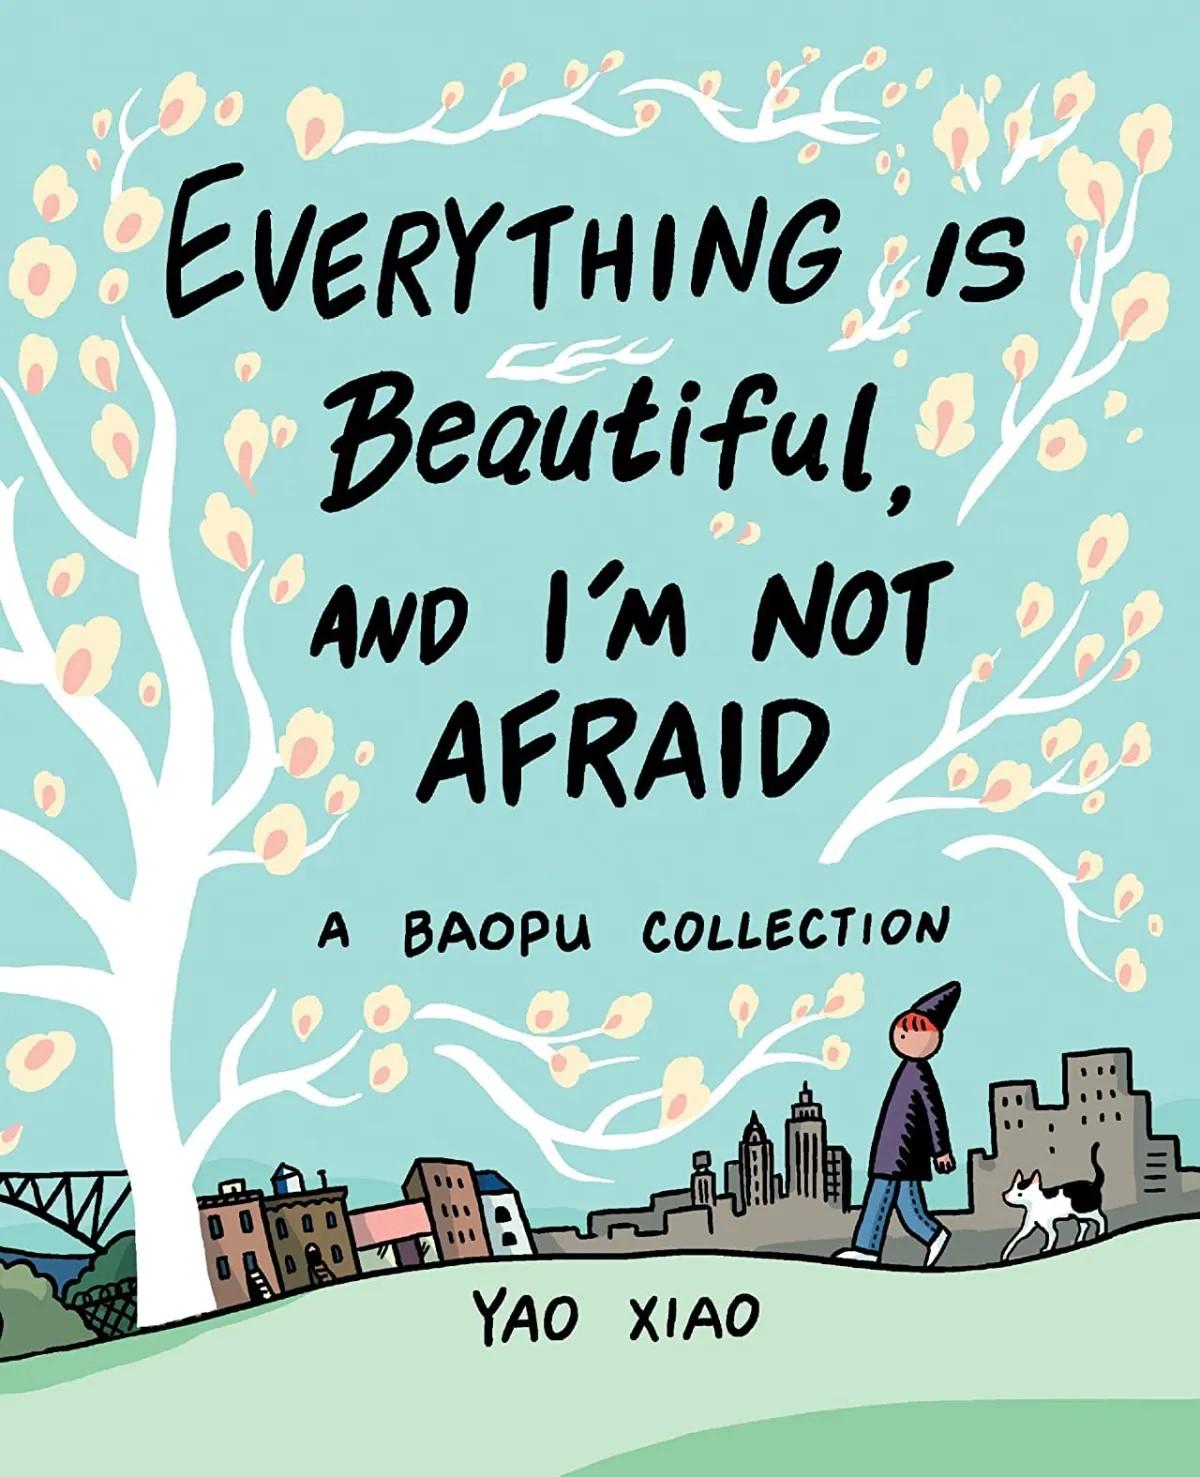 book cover for the book Everything is Beautiful and I’m Not Afraid: a Baopu Collection by Yao Xiao. In front of a blue sky, we see the black text of the title and author among a white tree with pink-orange leaves. A person wearing a dark grey pointy hat, dark grey long sleeved shirt, and blue jeans walks next to a black and white cat. In the background is a harsh grey city scape next to colorful buildings.